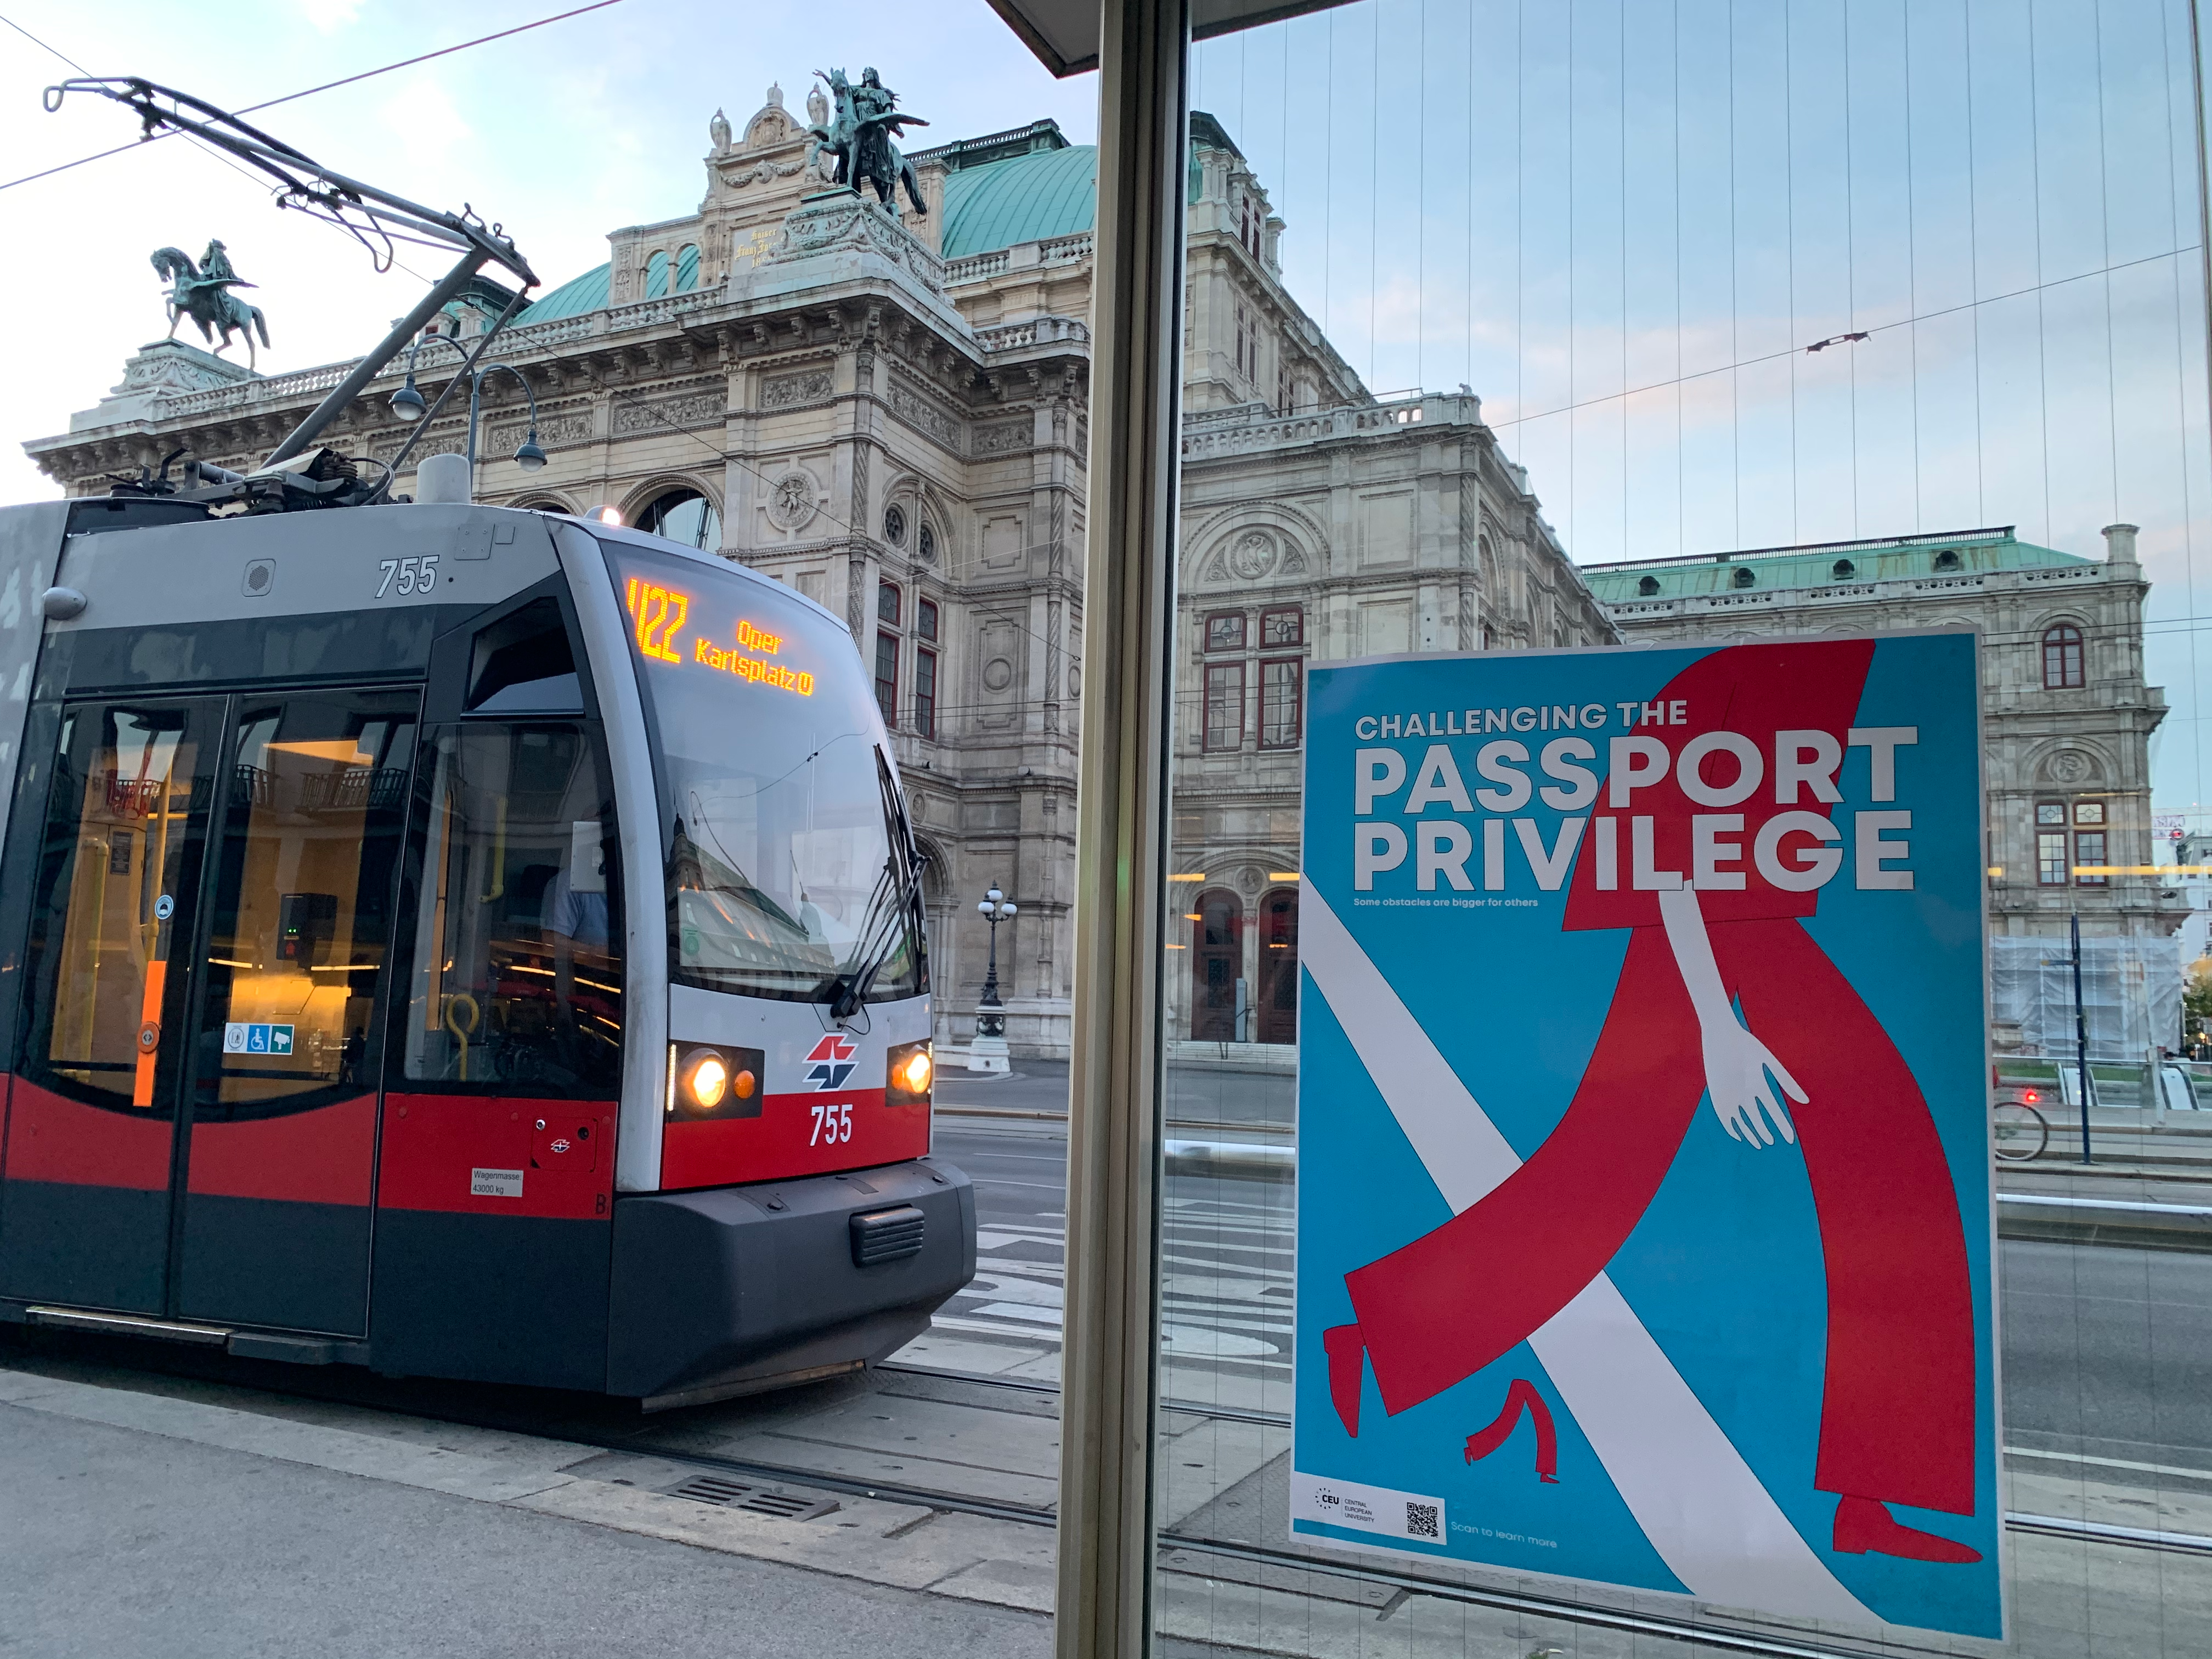 Blue “Challenging the Passport Privilege” poster hung in front of a tram.